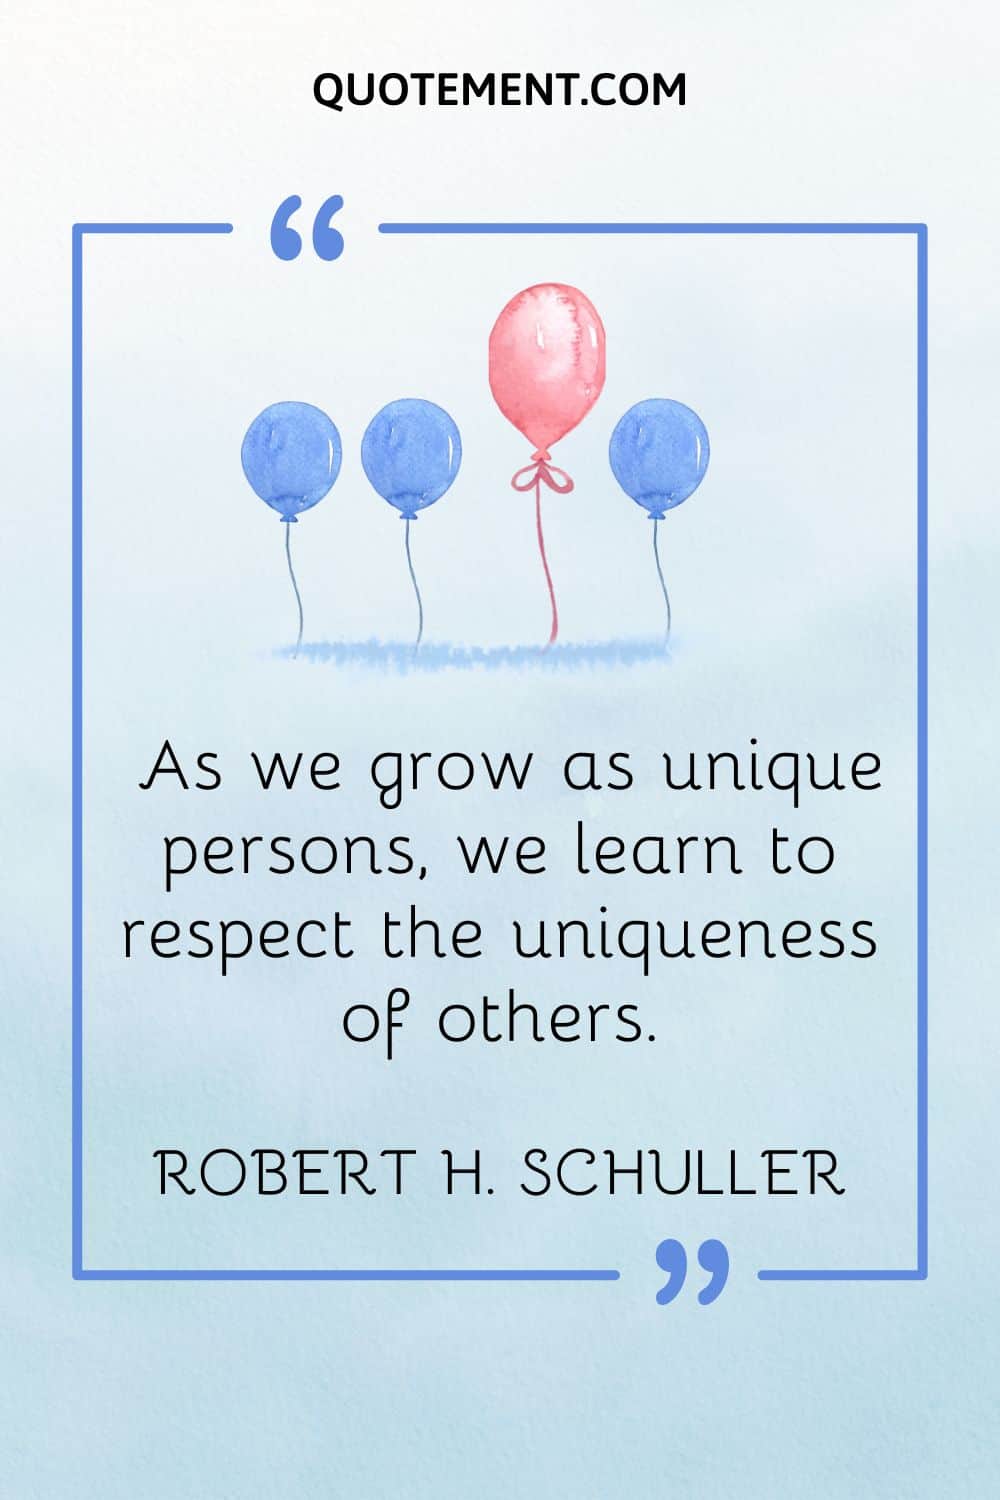 As we grow as unique persons, we learn to respect the uniqueness of others